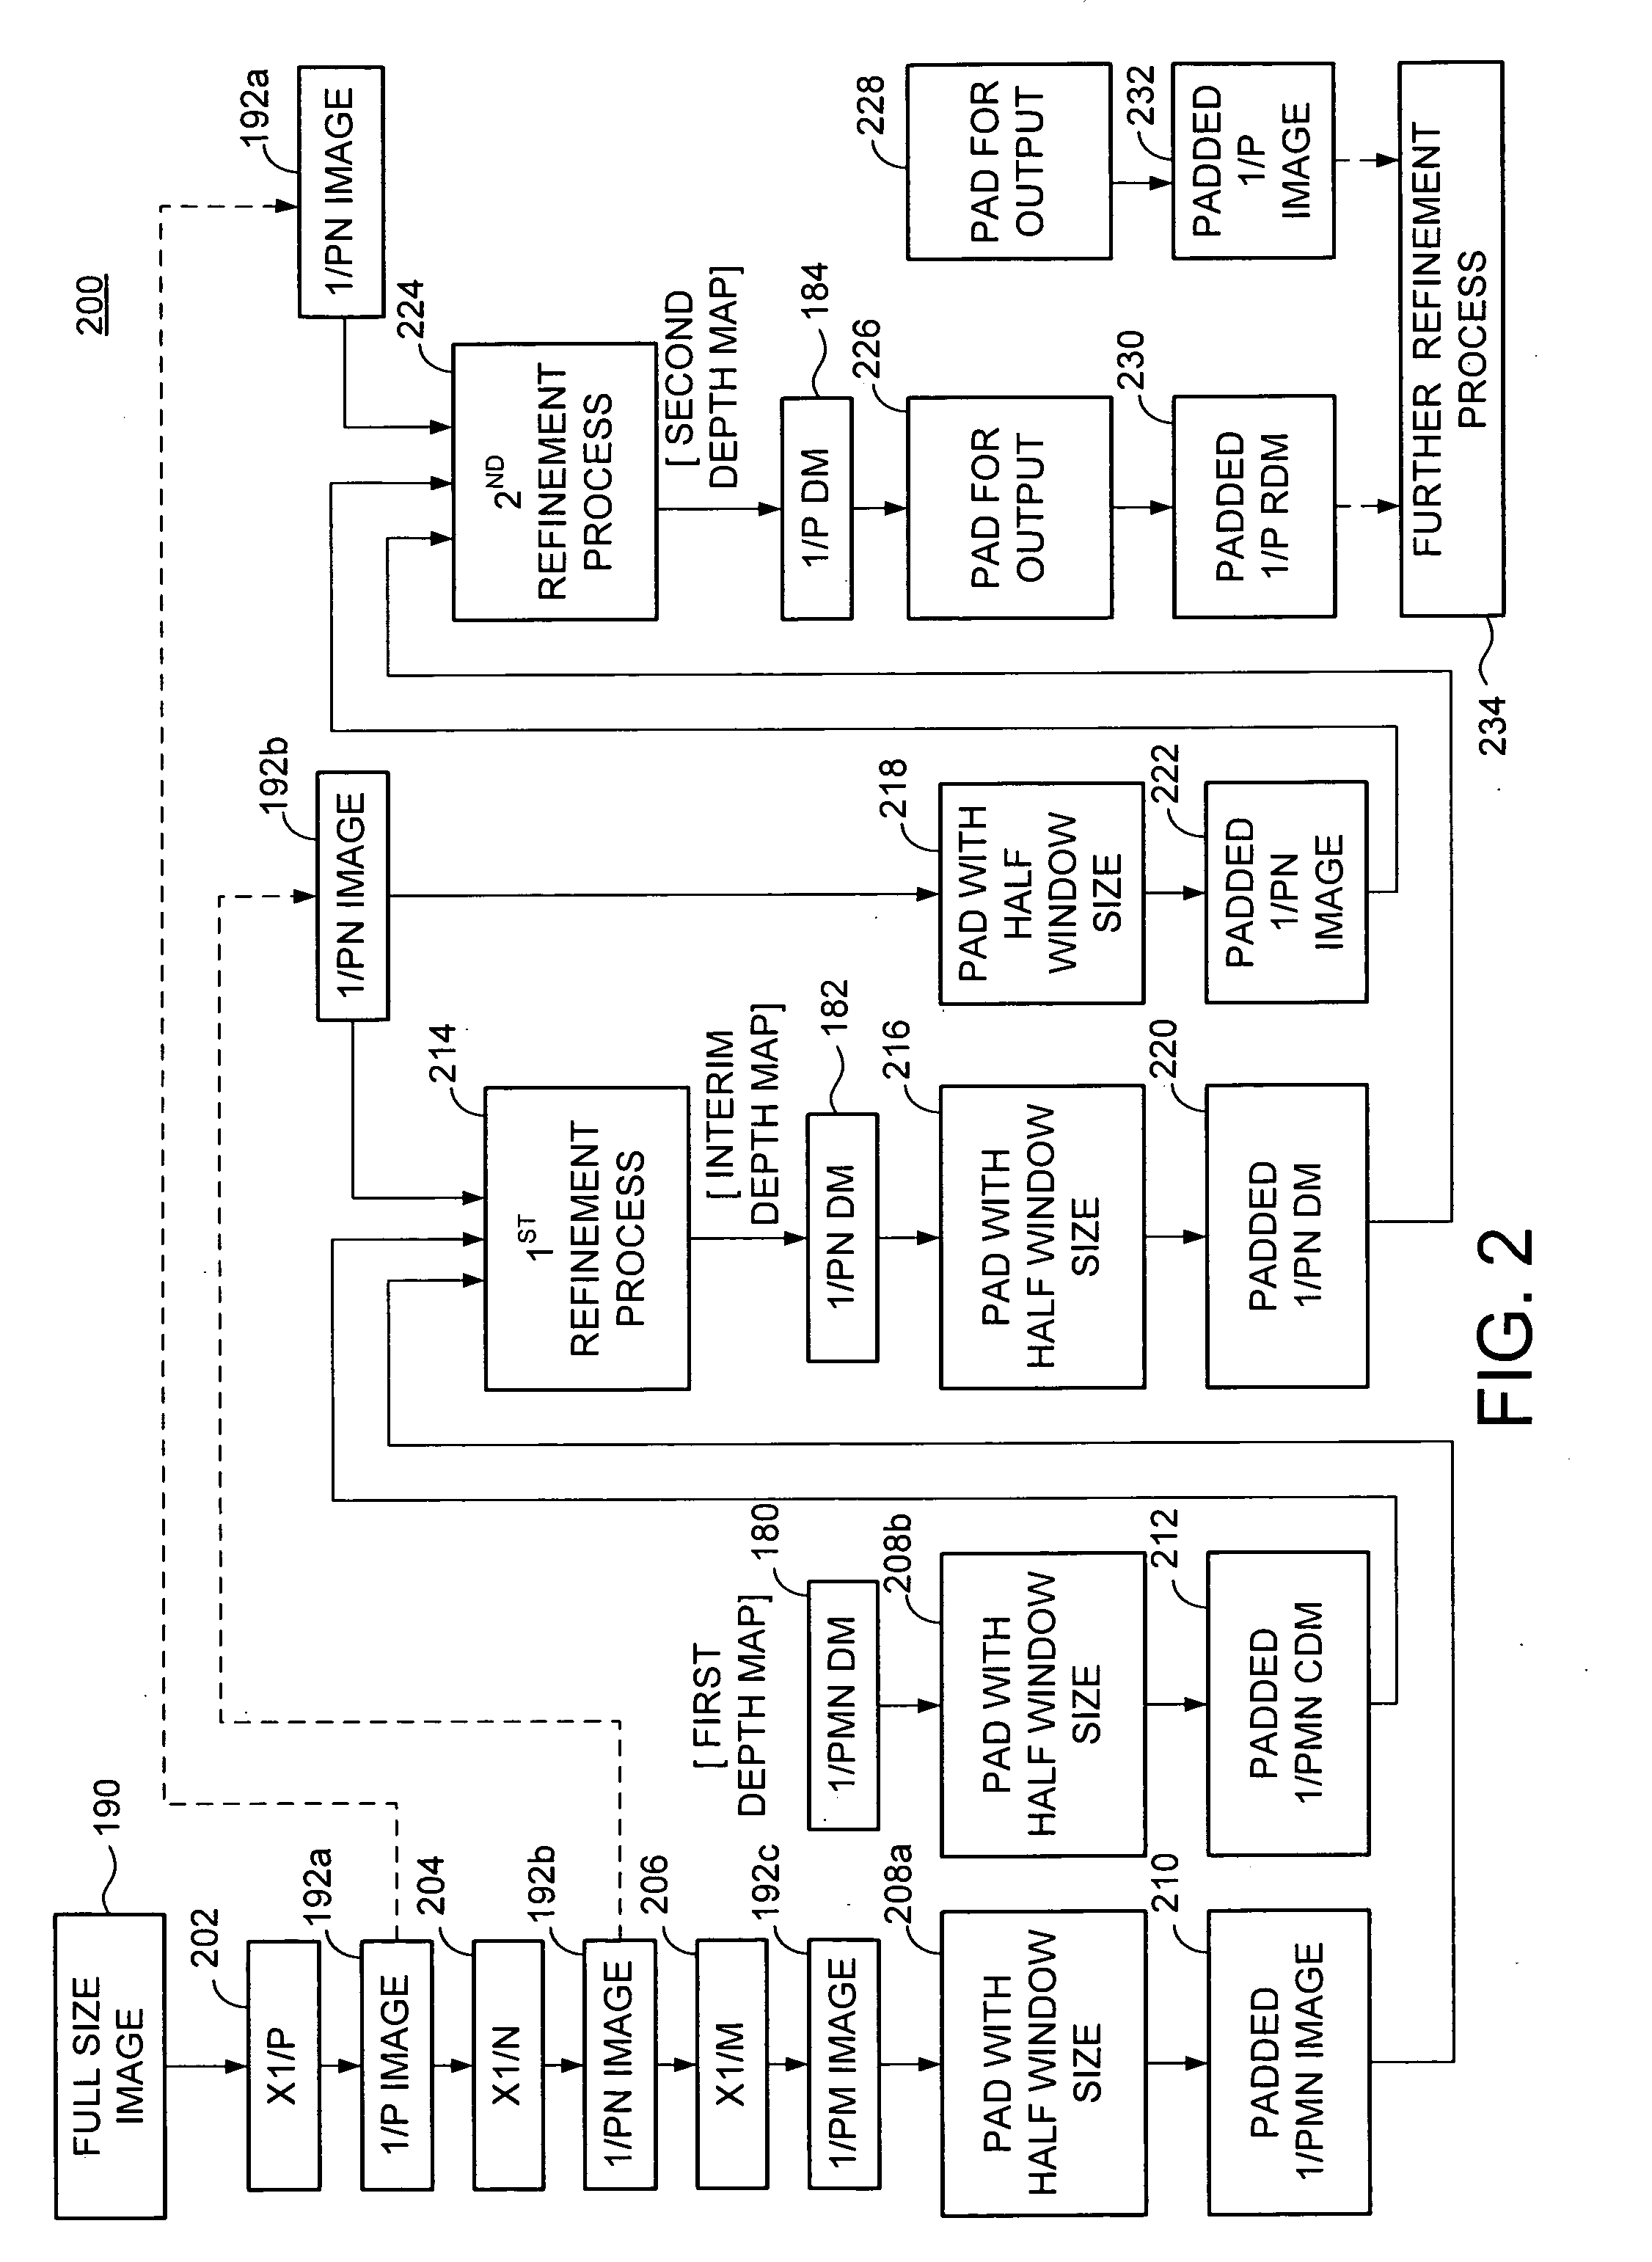 Method and apparatus for generating a dense depth map using an adaptive joint bilateral filter